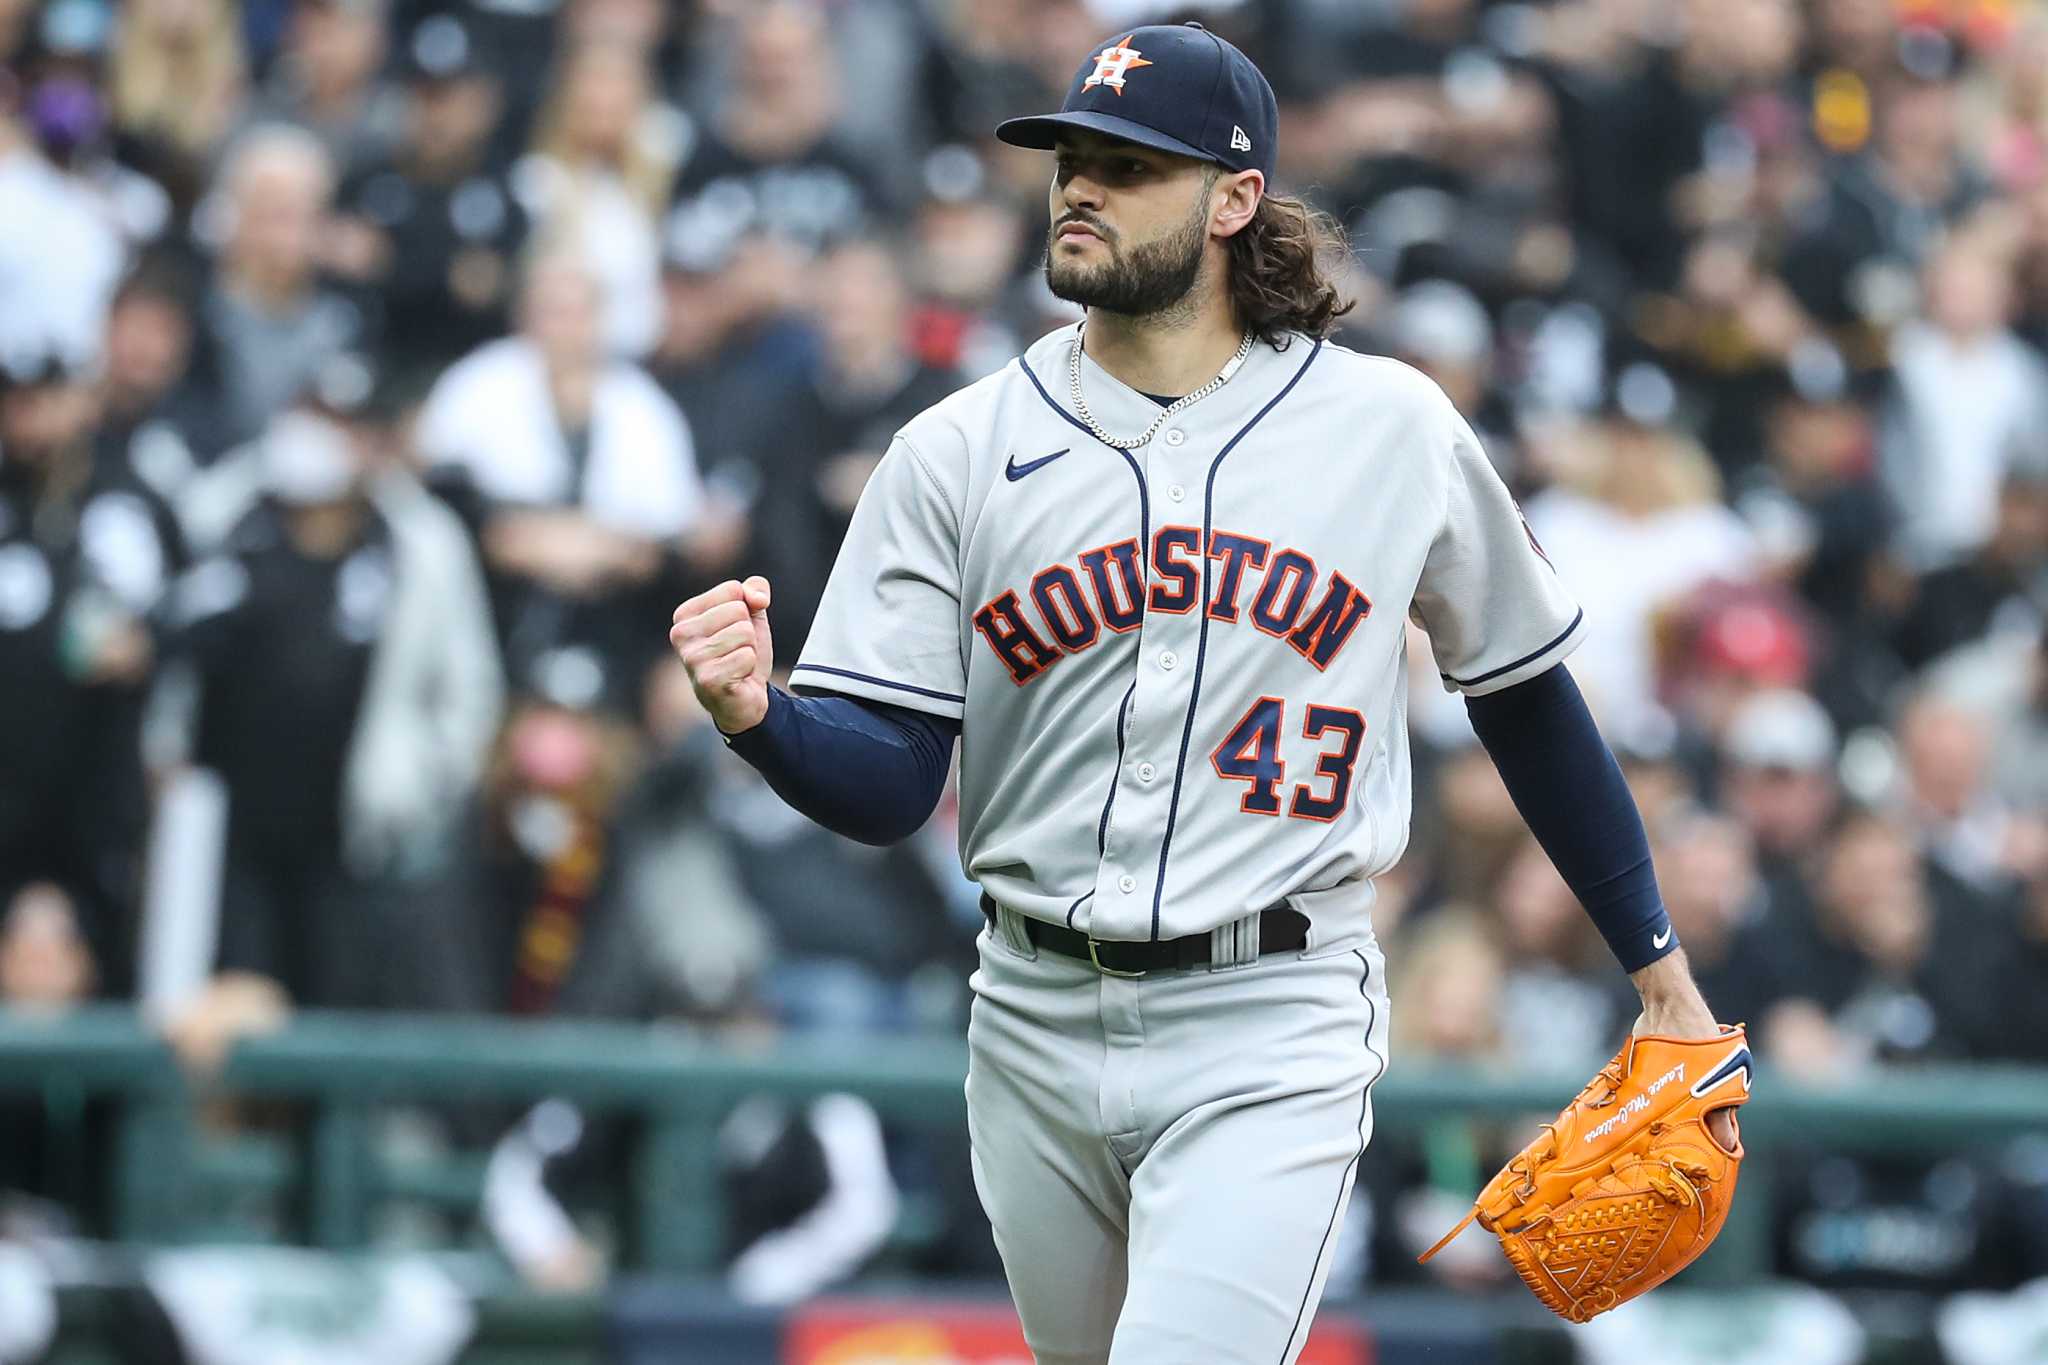 Astros pitcher Lance McCullers Jr. explains arm injury